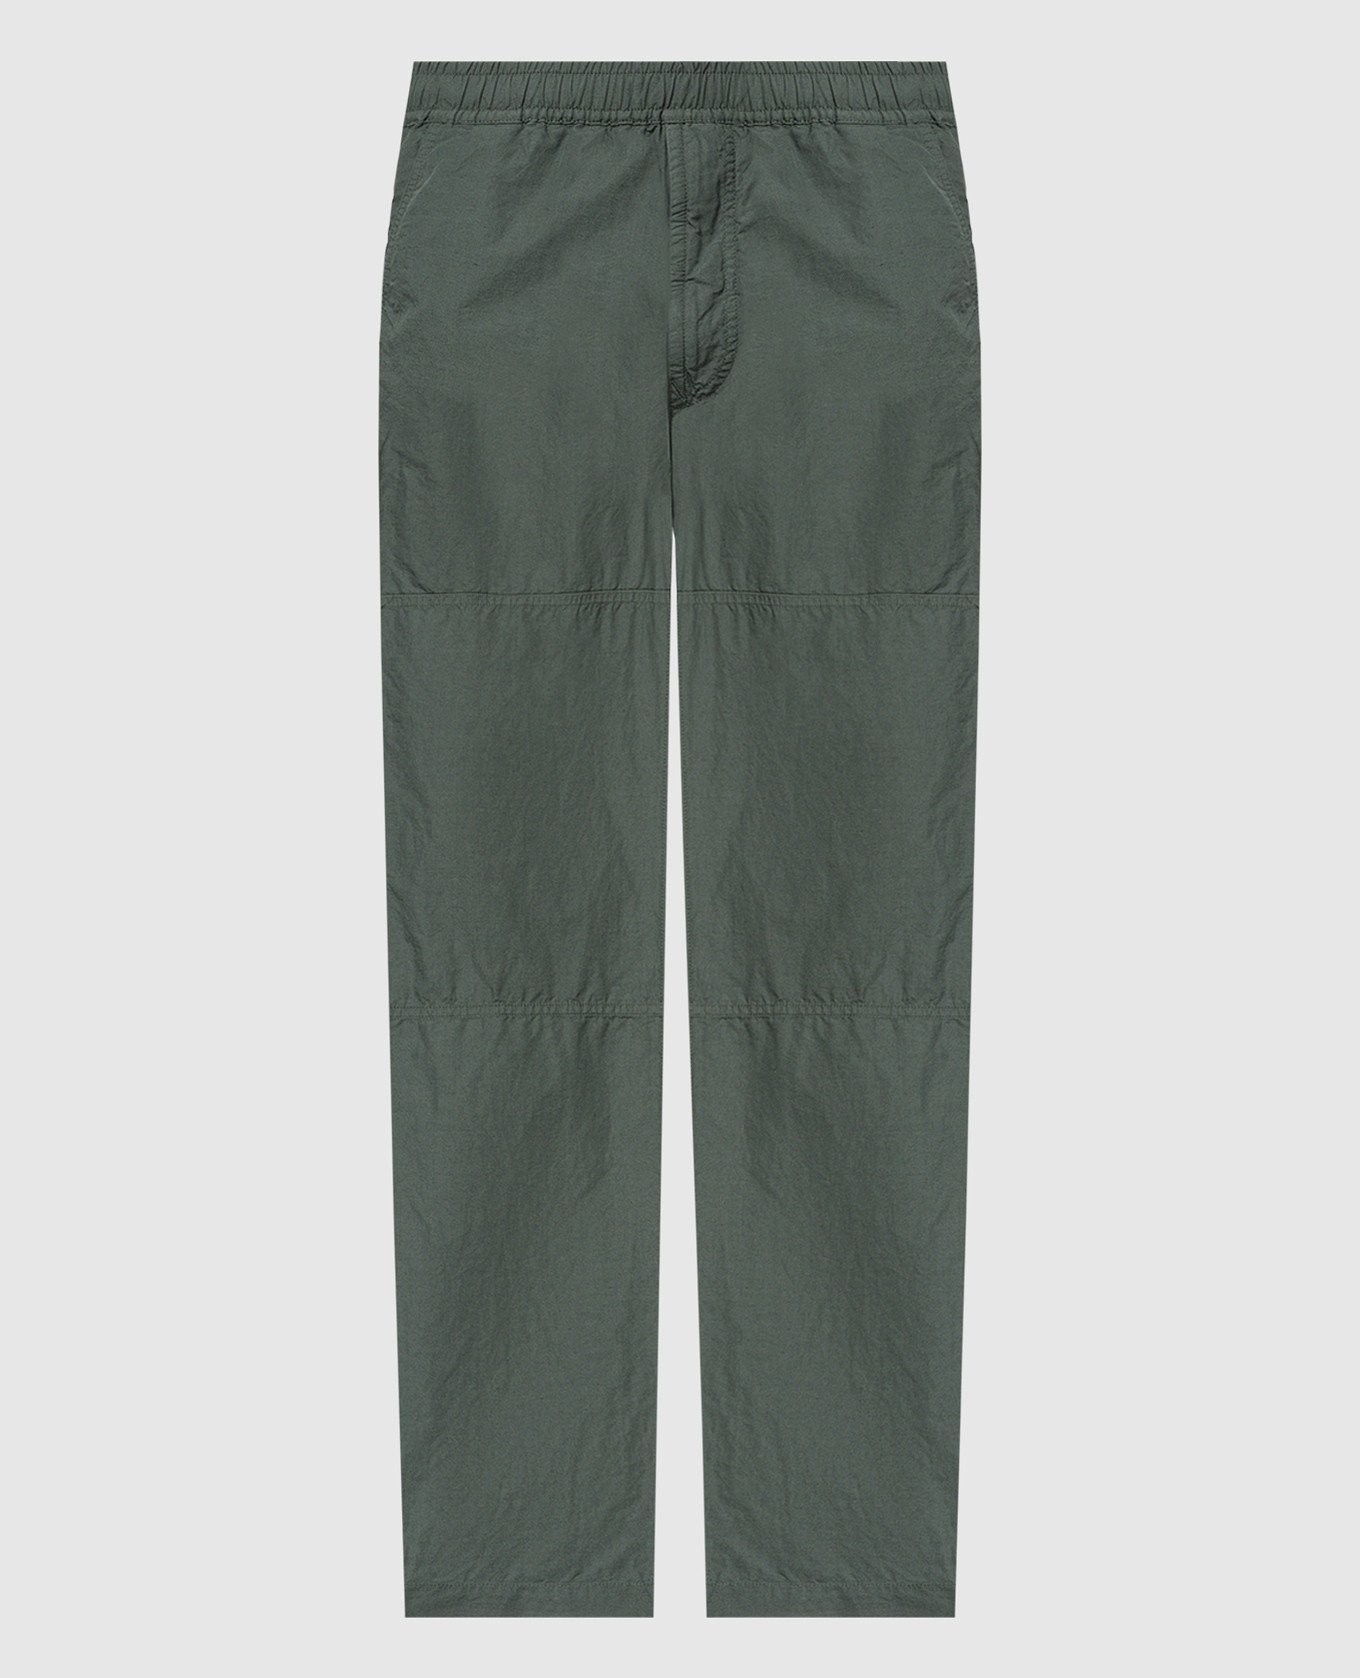 Green linen trousers with logo patch